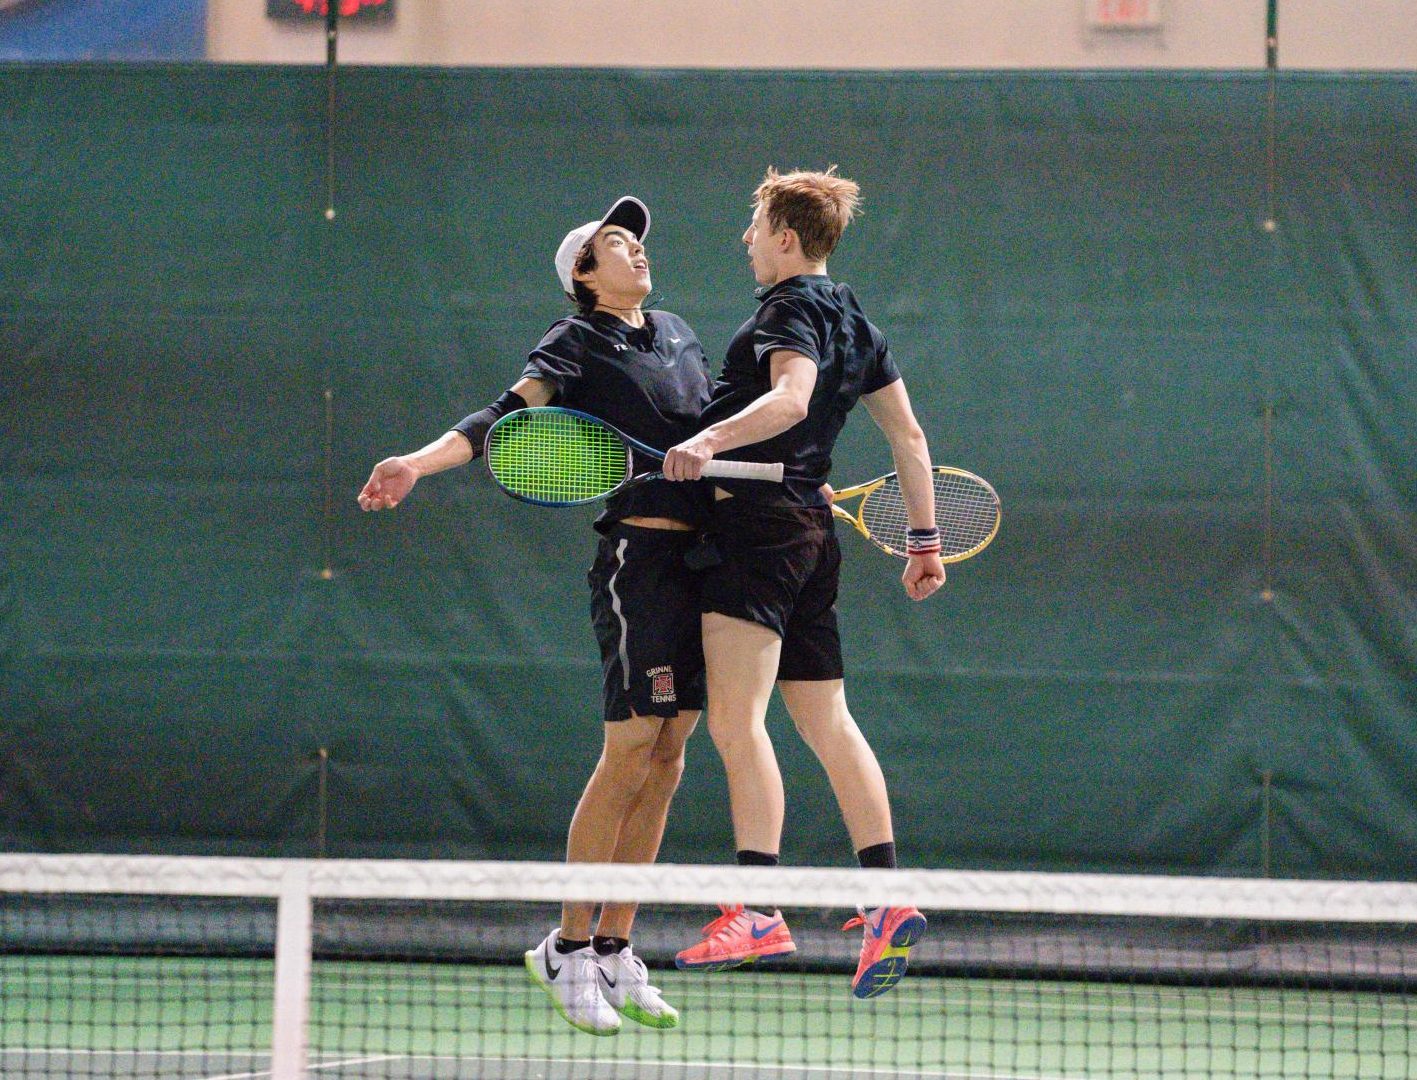 From left: Lucas Willett `26 and Karch Knoll `25 chest bump during their doubles match against Iowa Central Community College. They won their match 8-6, and the Pioneers won the matchup 5-4.